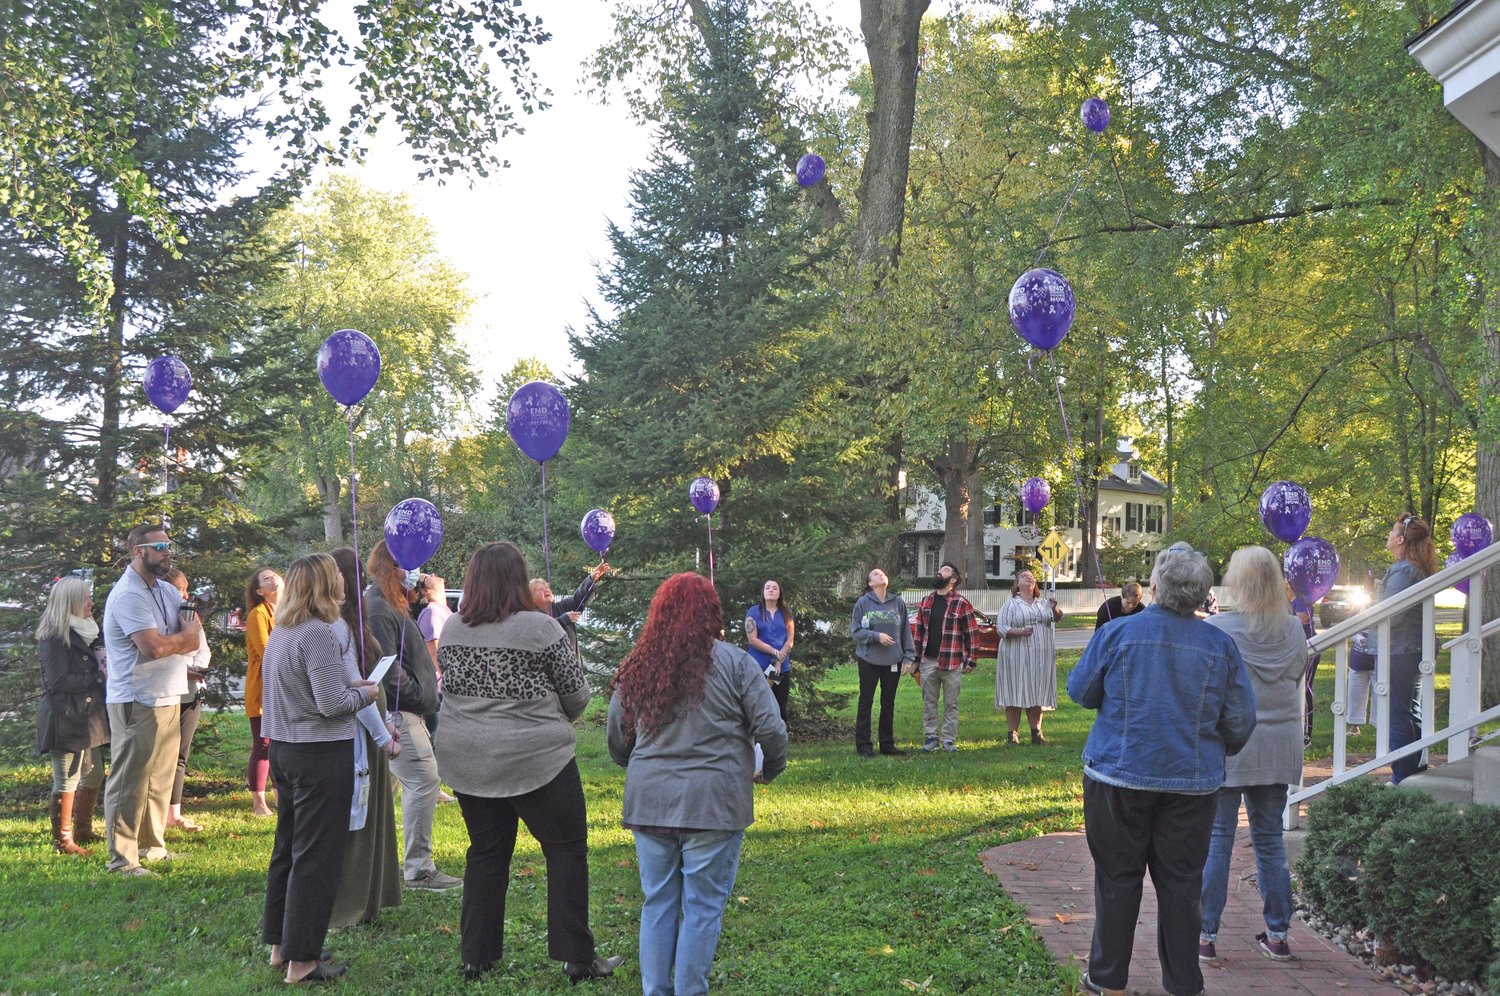 People release balloons on the Lane Place grounds to raise awareness of domestic violence on Wednesday. The event was organized by the Family Crisis Shelter to recognize Domestic Violence Awareness Month. Statewide between July 1, 2020 and June 30, 2021, there were 98 deaths resulting from 69 domestic violence incidents, according to the Indiana Coalition Against Domestic Violence. That is an overall increase of 181% over the previous year. Advocates say the coronavirus pandemic has made it more difficult to help domestic violence survivors.